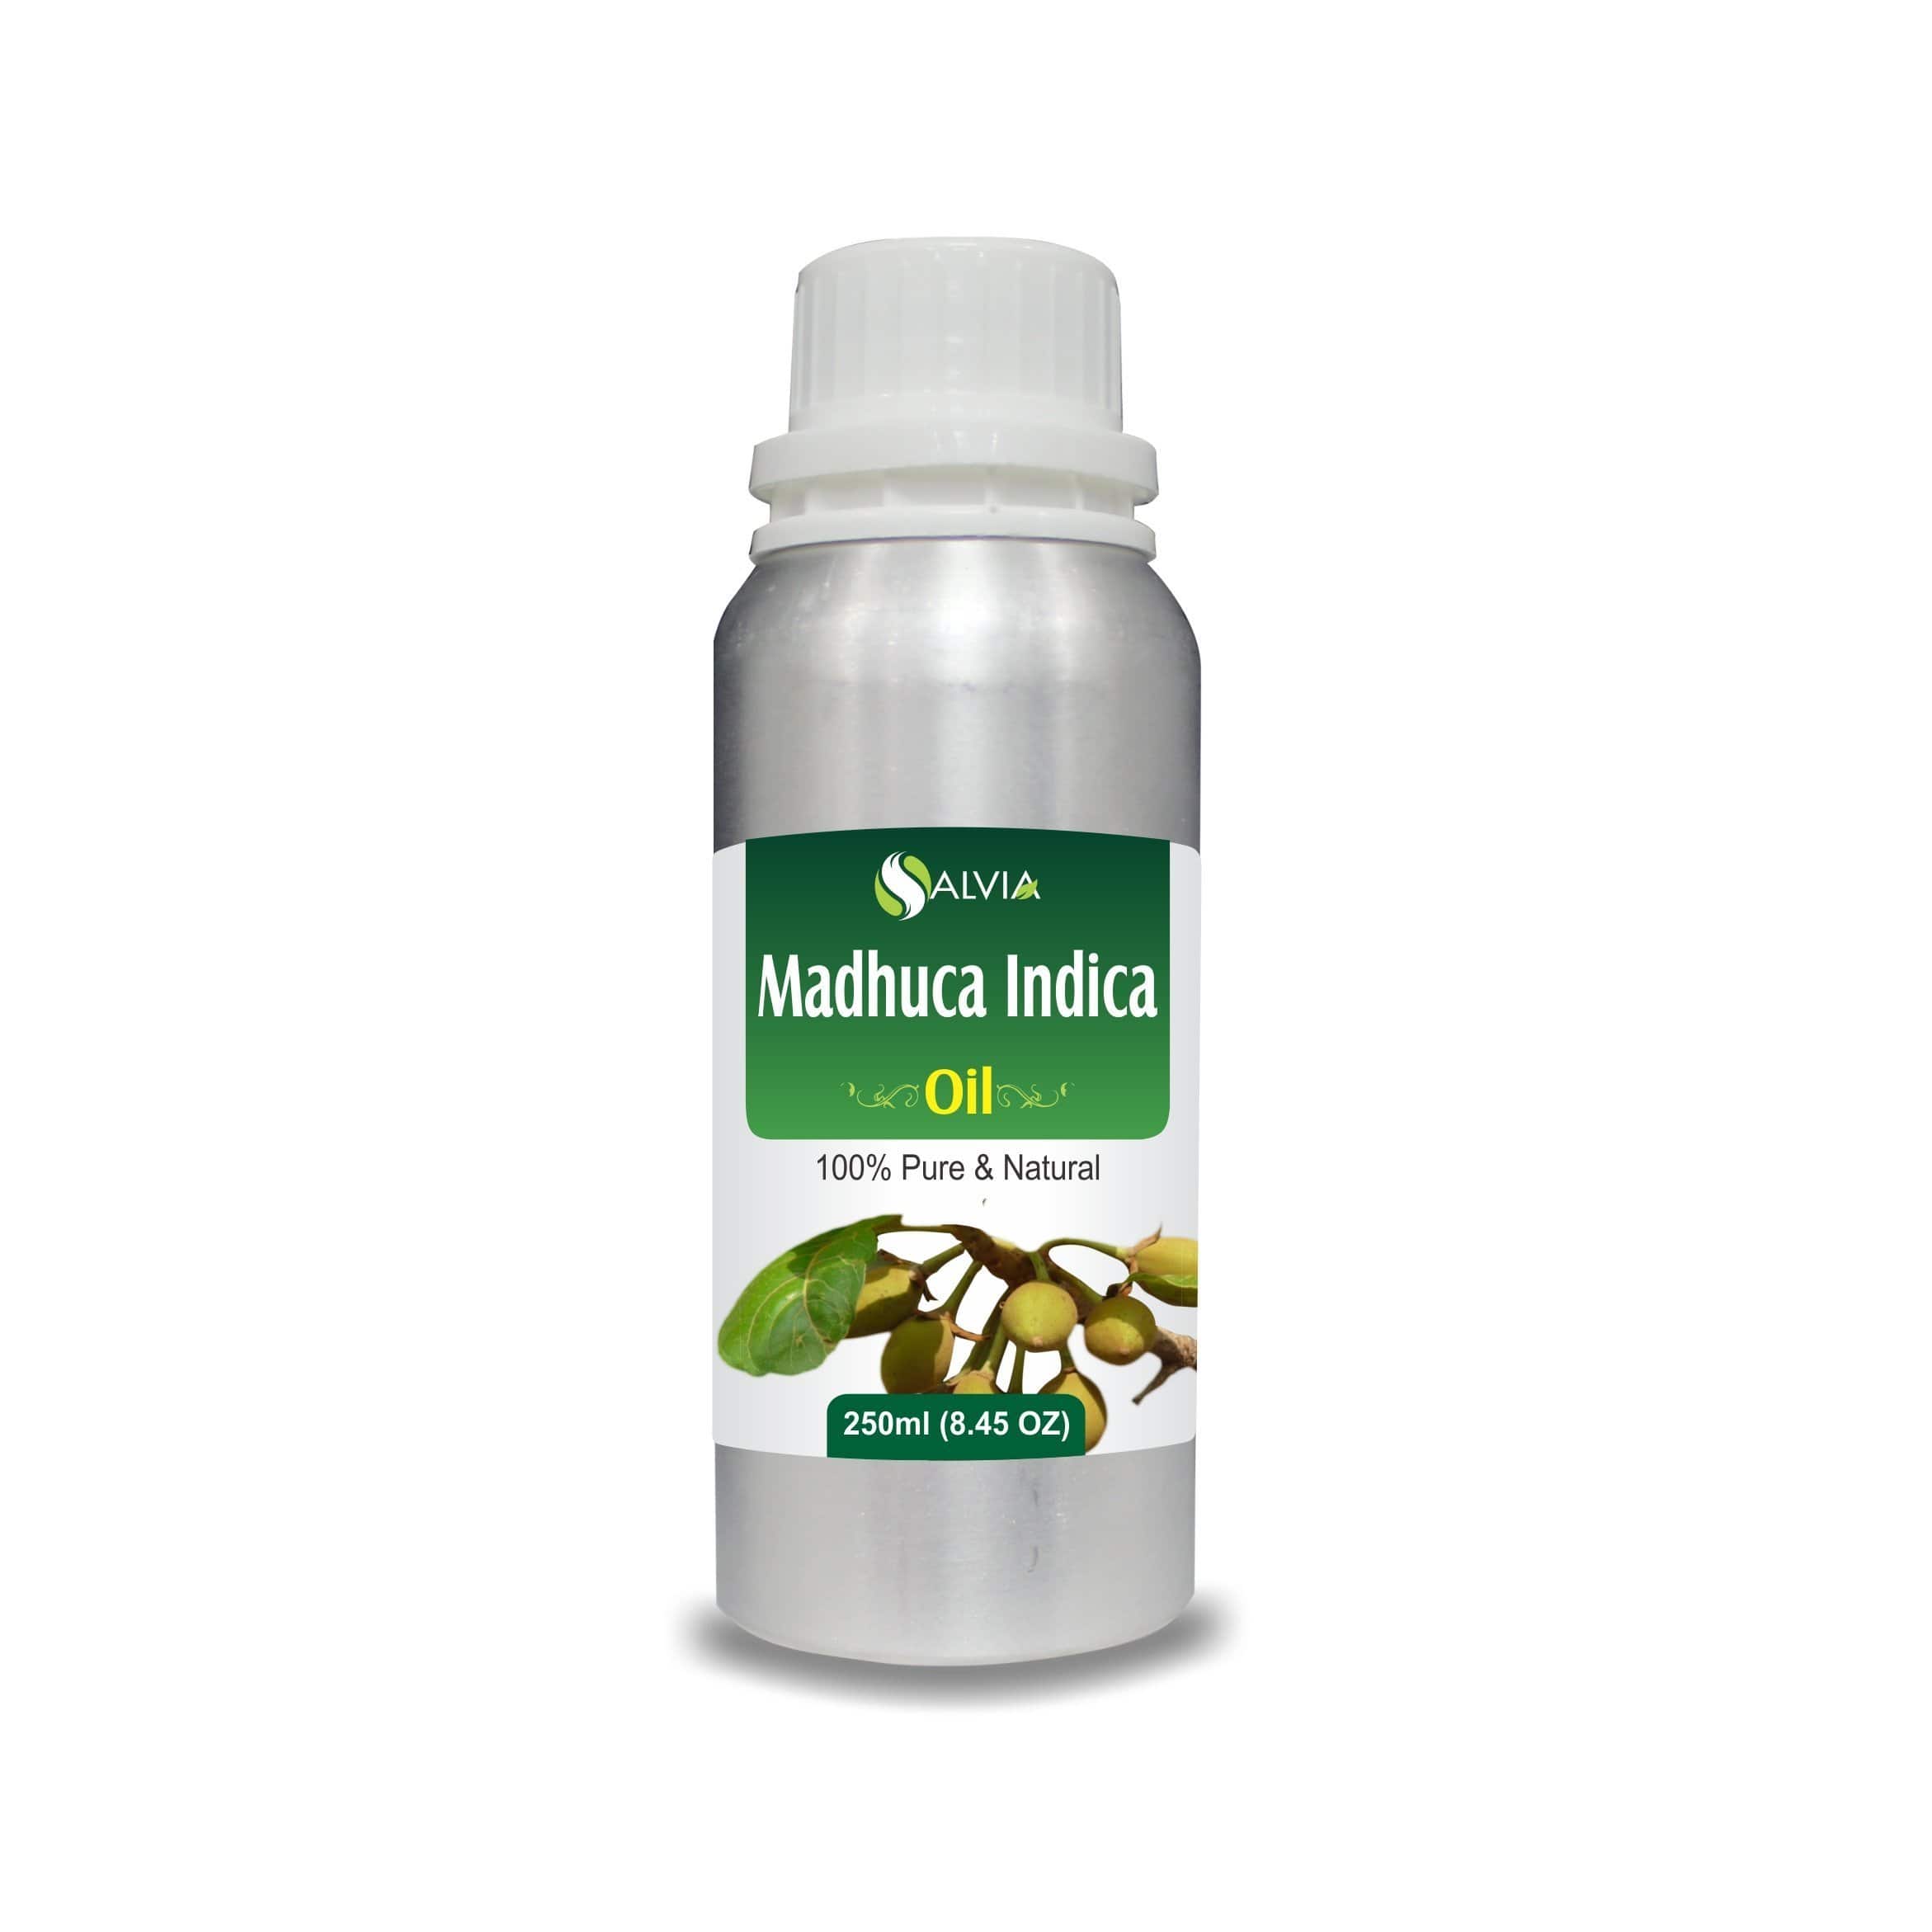 Salvia Natural Carrier Oils 250ml Madhuca Indica Oil (Bassia Latifolia) 100% Pure & Natural Carrier Oil Improves Skin Health, Mosquito Repellent, Reduces Joint Pain